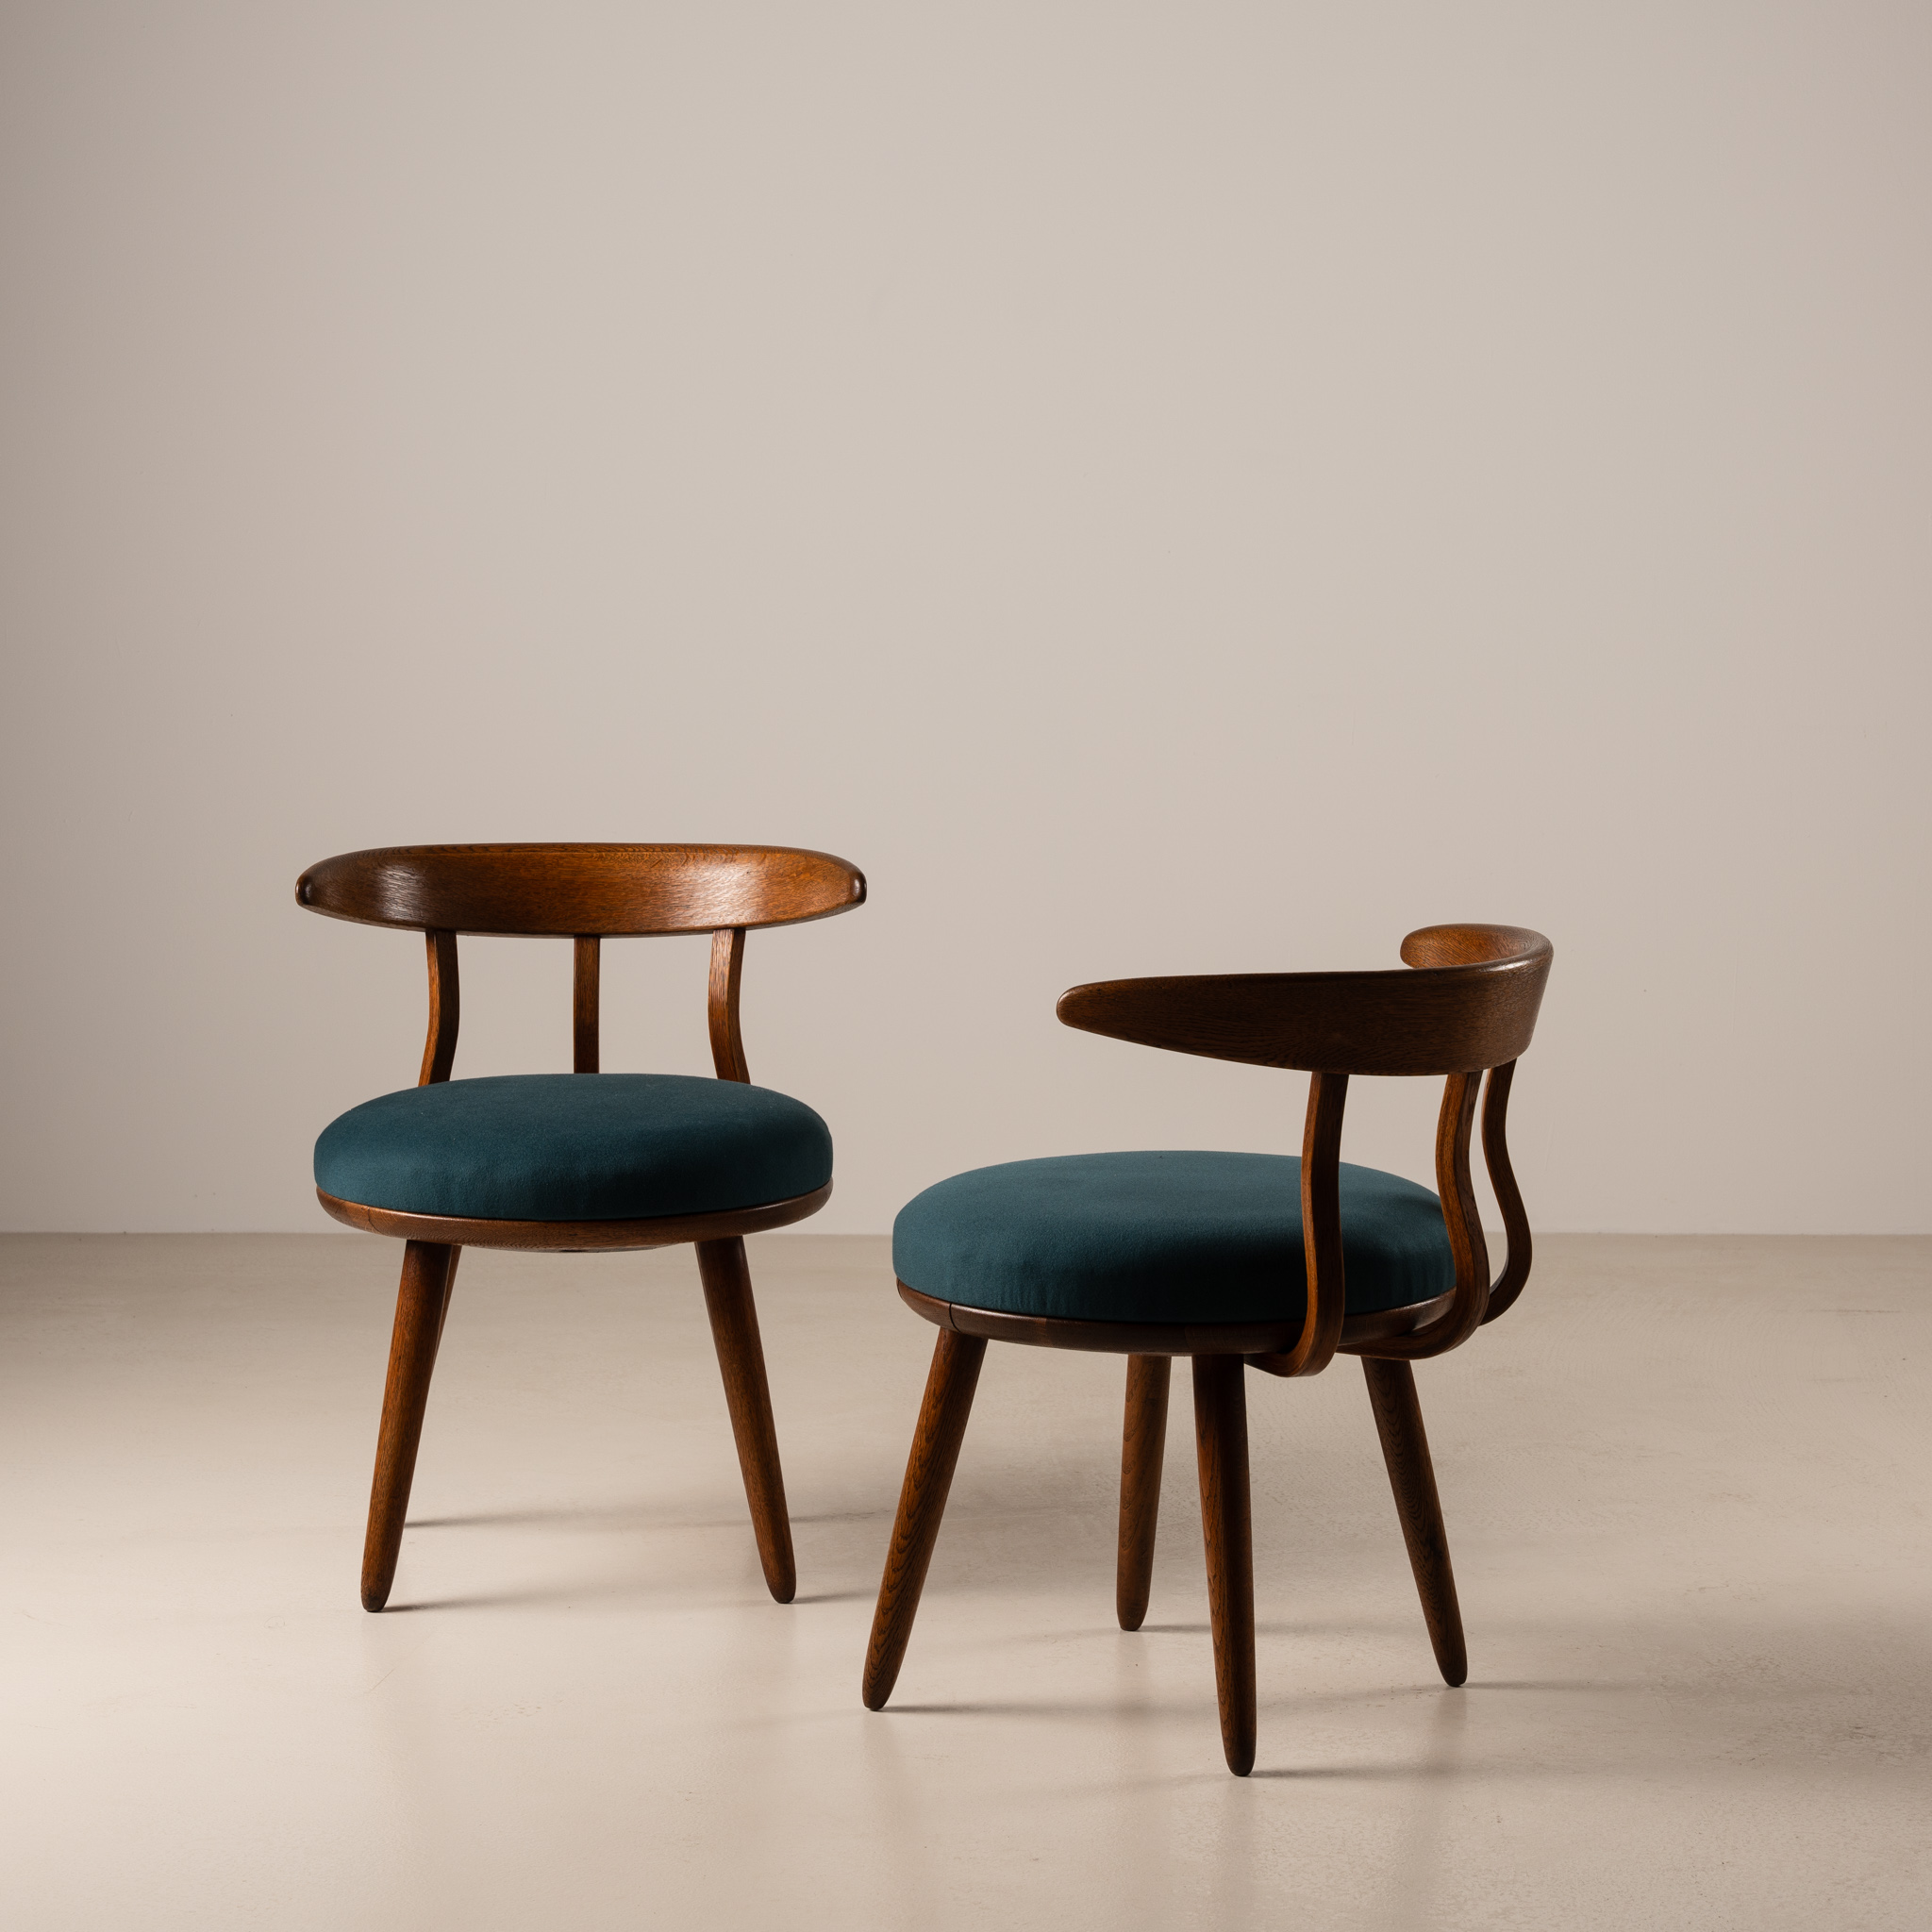 1950s Prototype Chairs by Isamu Kenmochi - Detailed Shot